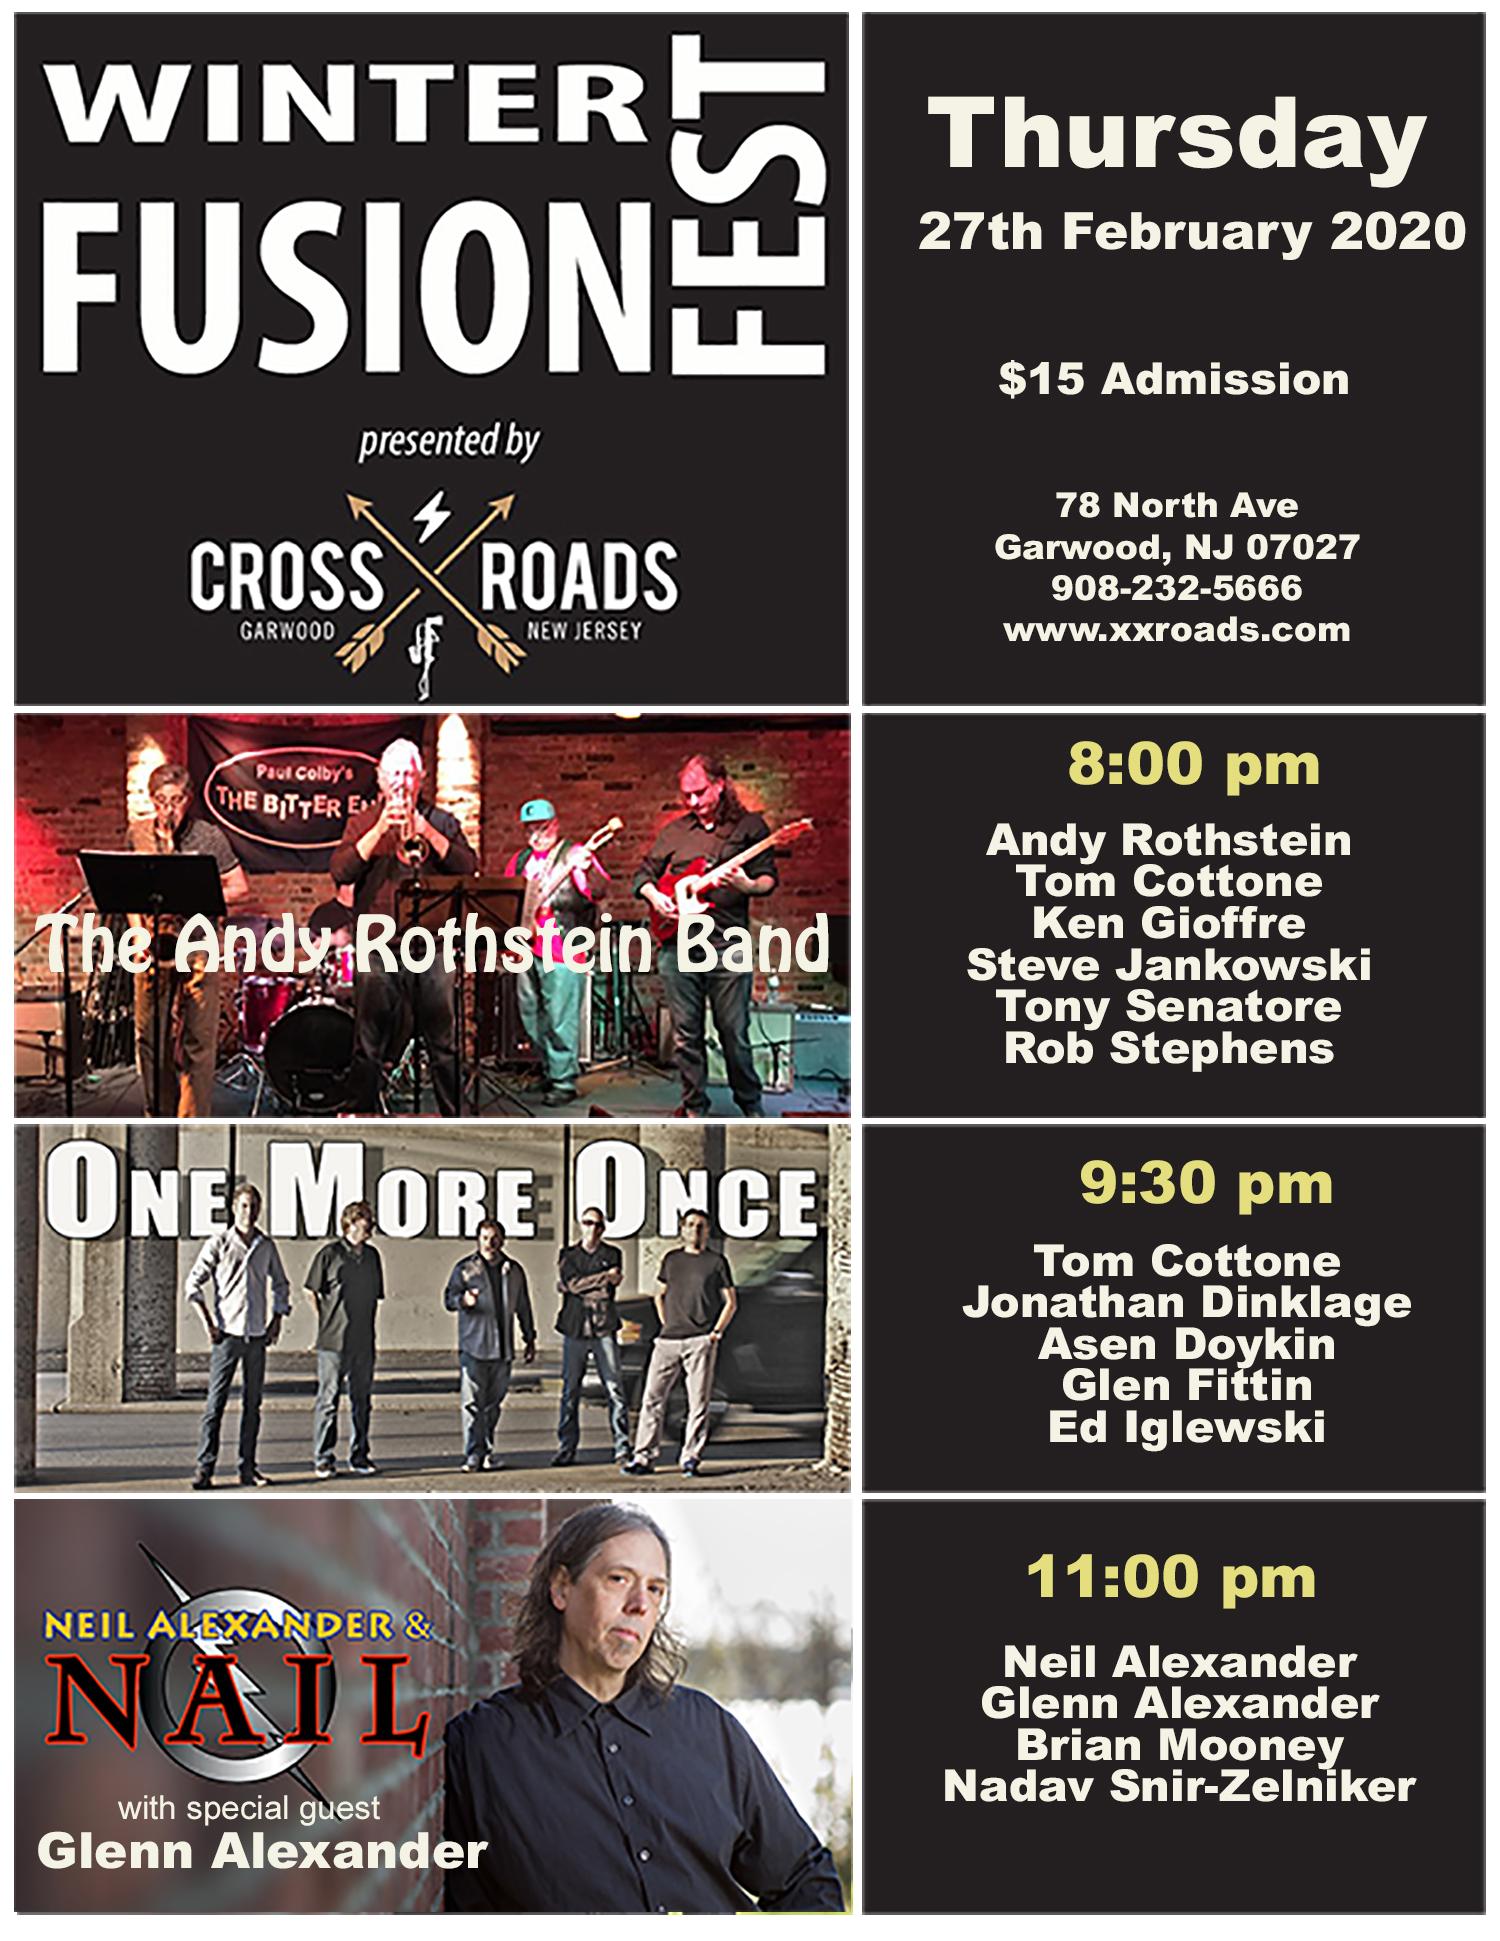 FusionFest wThe Andy Rothstein Band, One More Once, & Neil Alexander & NAIL